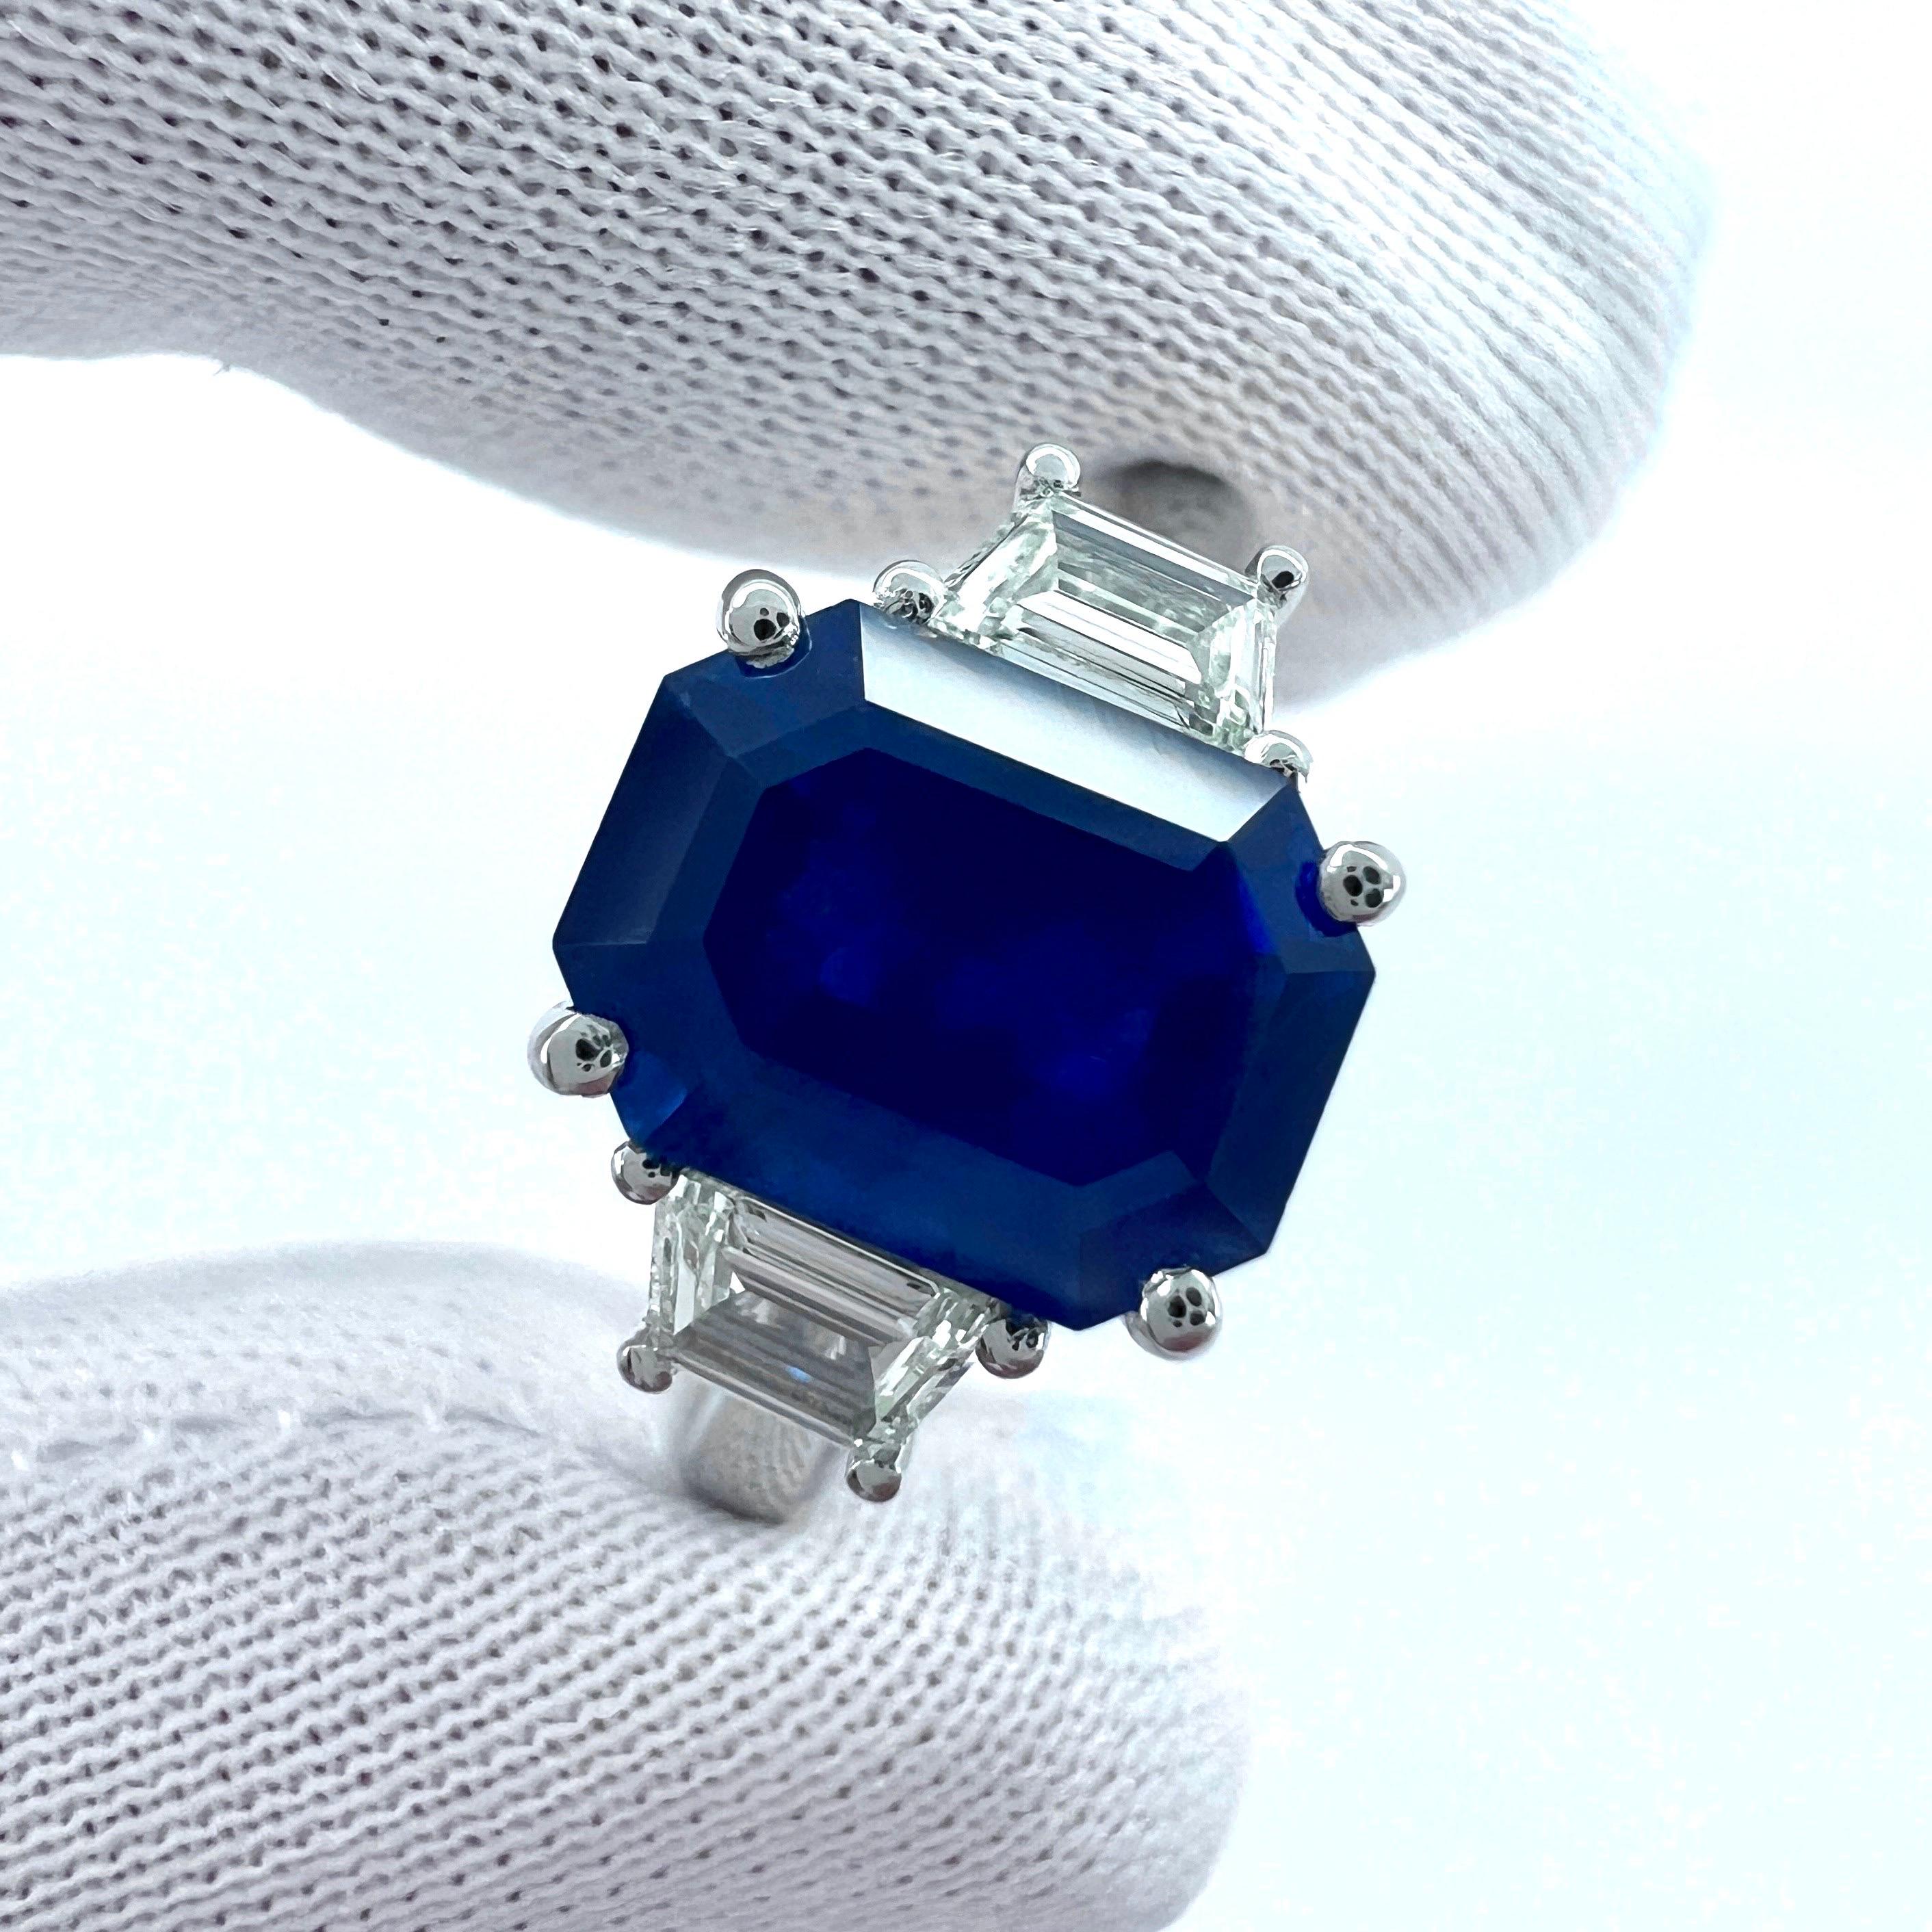 Fine Natural 'Velvet' Blue Emerald Cut Ceylon Sapphire & Diamond Three Stone Platinum Ring.

Large 3.5 Carat blue Ceylon sapphire with an excellent emerald octagon cut and very good clarity. Some small natural features in the stone under a loupe,